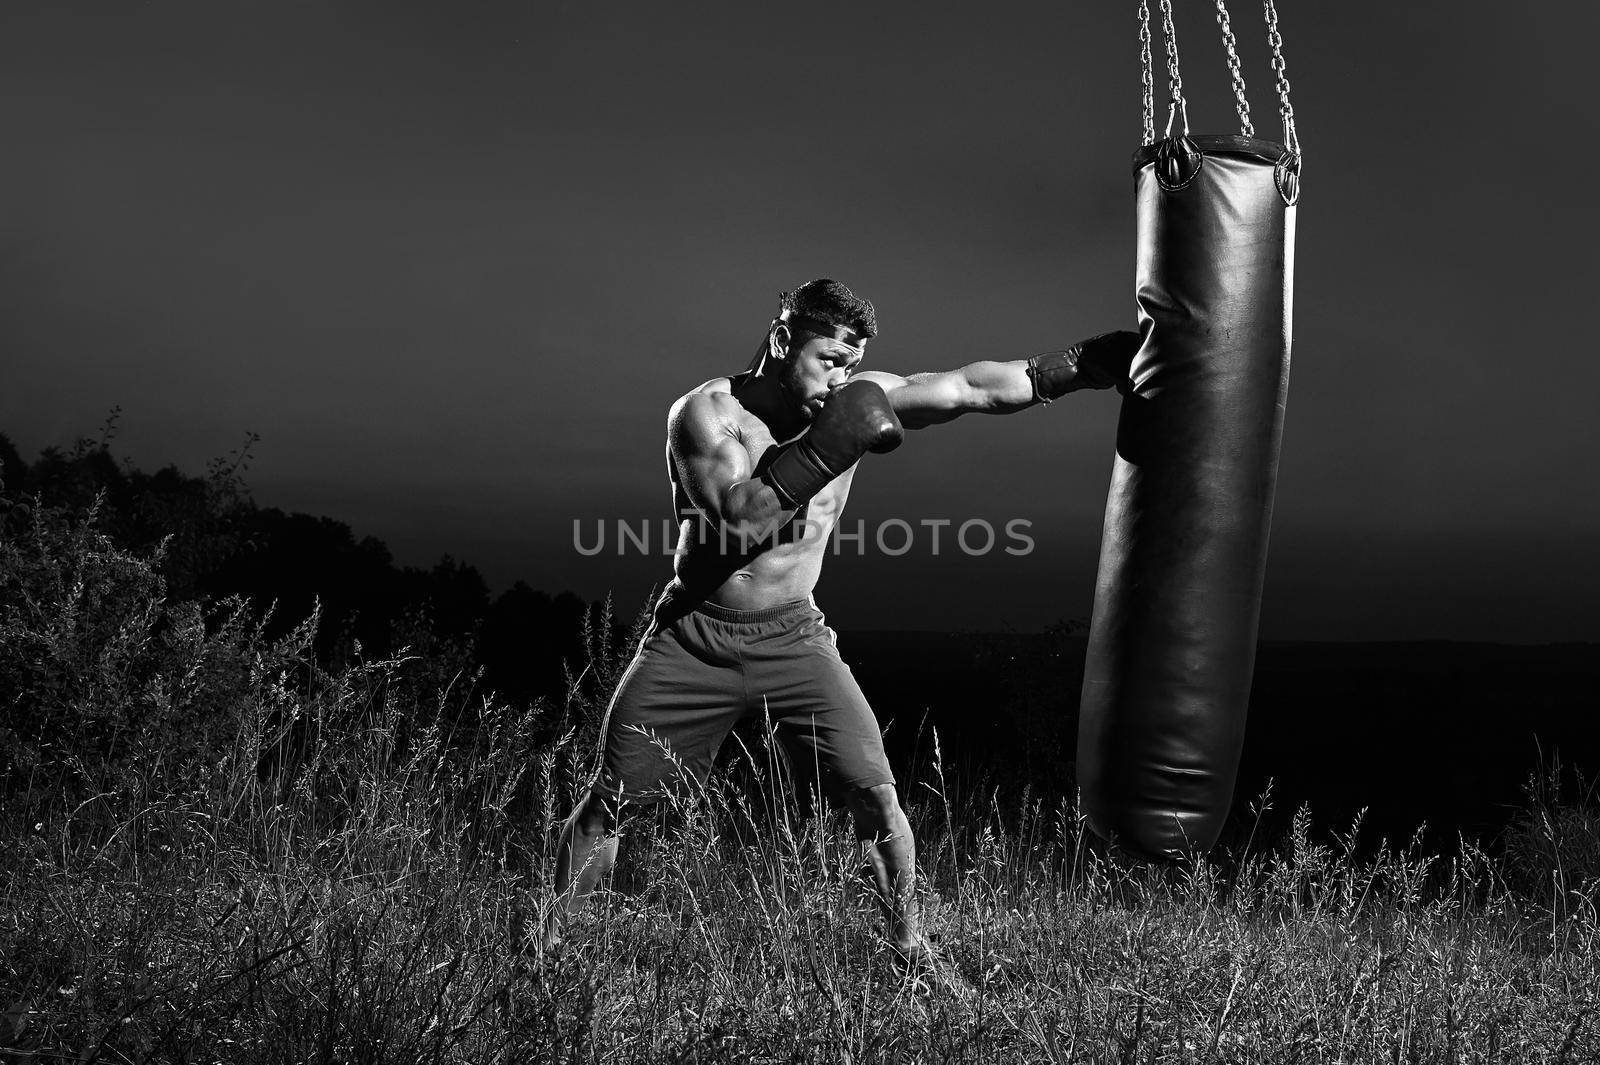 Monochrome shot of an aggressive young boxer hitting punching bag training outdoors copyspace masculinity nature fitness sports athlete athletics activity lifestyle body muscular toughness combat